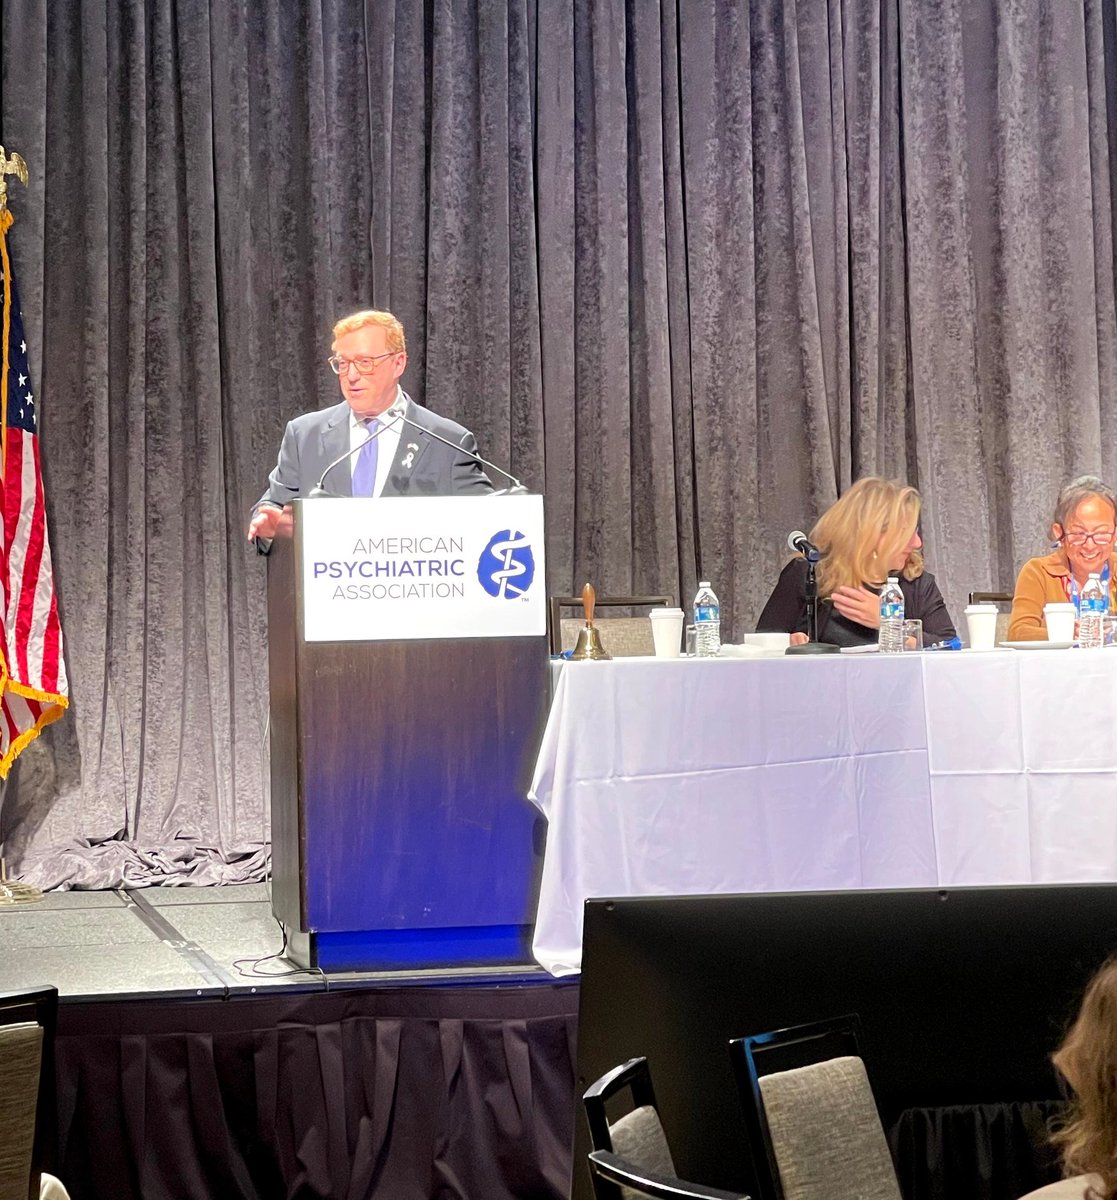 Today we kick off the 2022 Mental Health Services Conference. I am so excited for this meeting, and the collaborative spirit it embodies. We need to work together to confront the big issues affecting #MentalHealth in America.